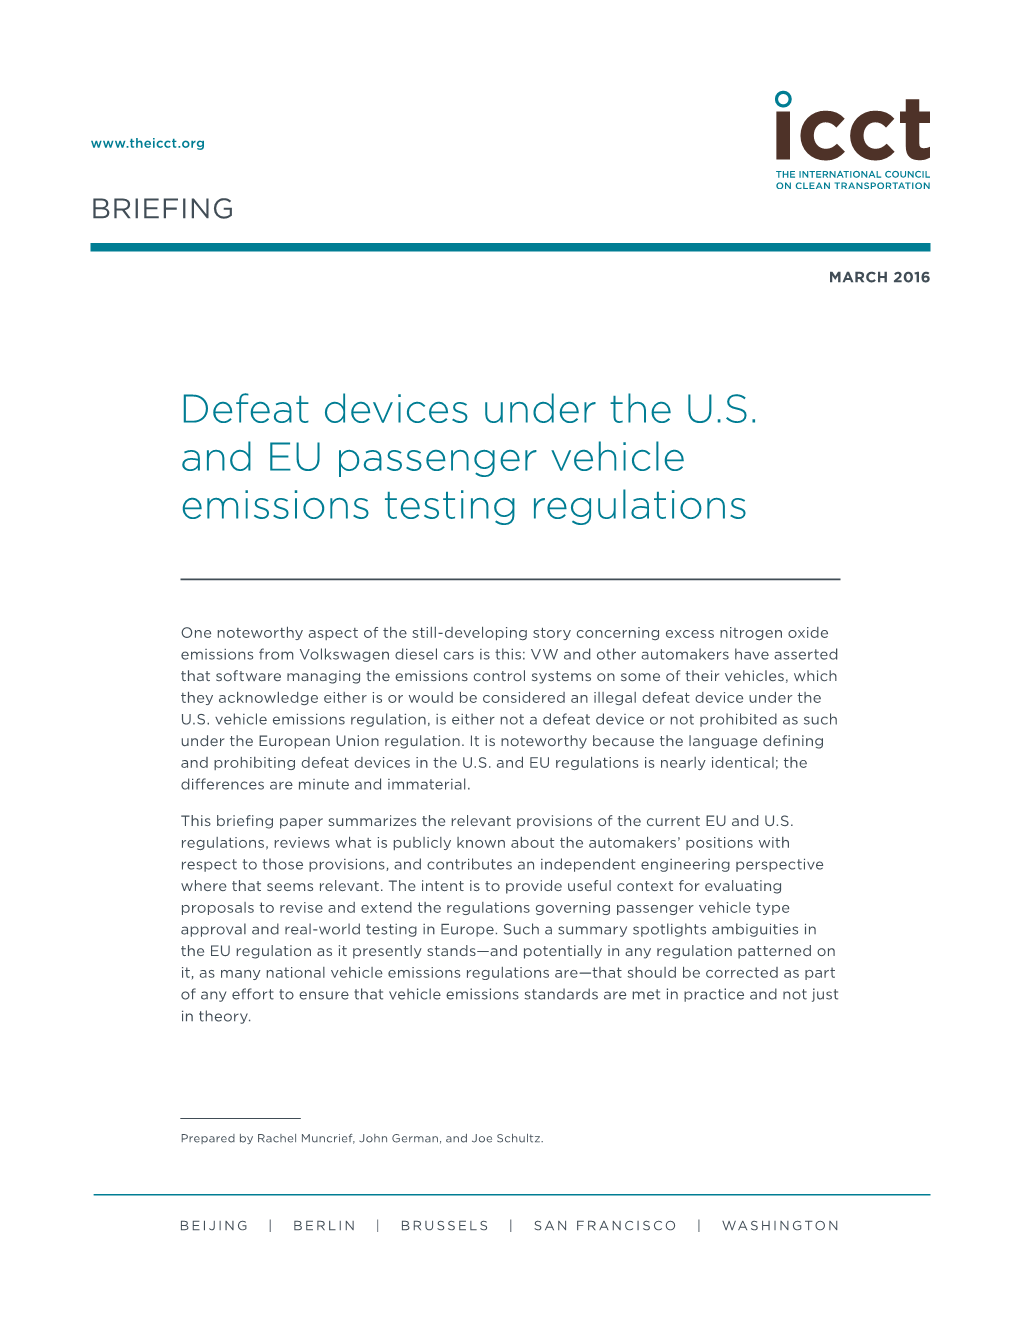 Defeat Devices Under the U.S. and EU Passenger Vehicle Emissions Testing Regulations